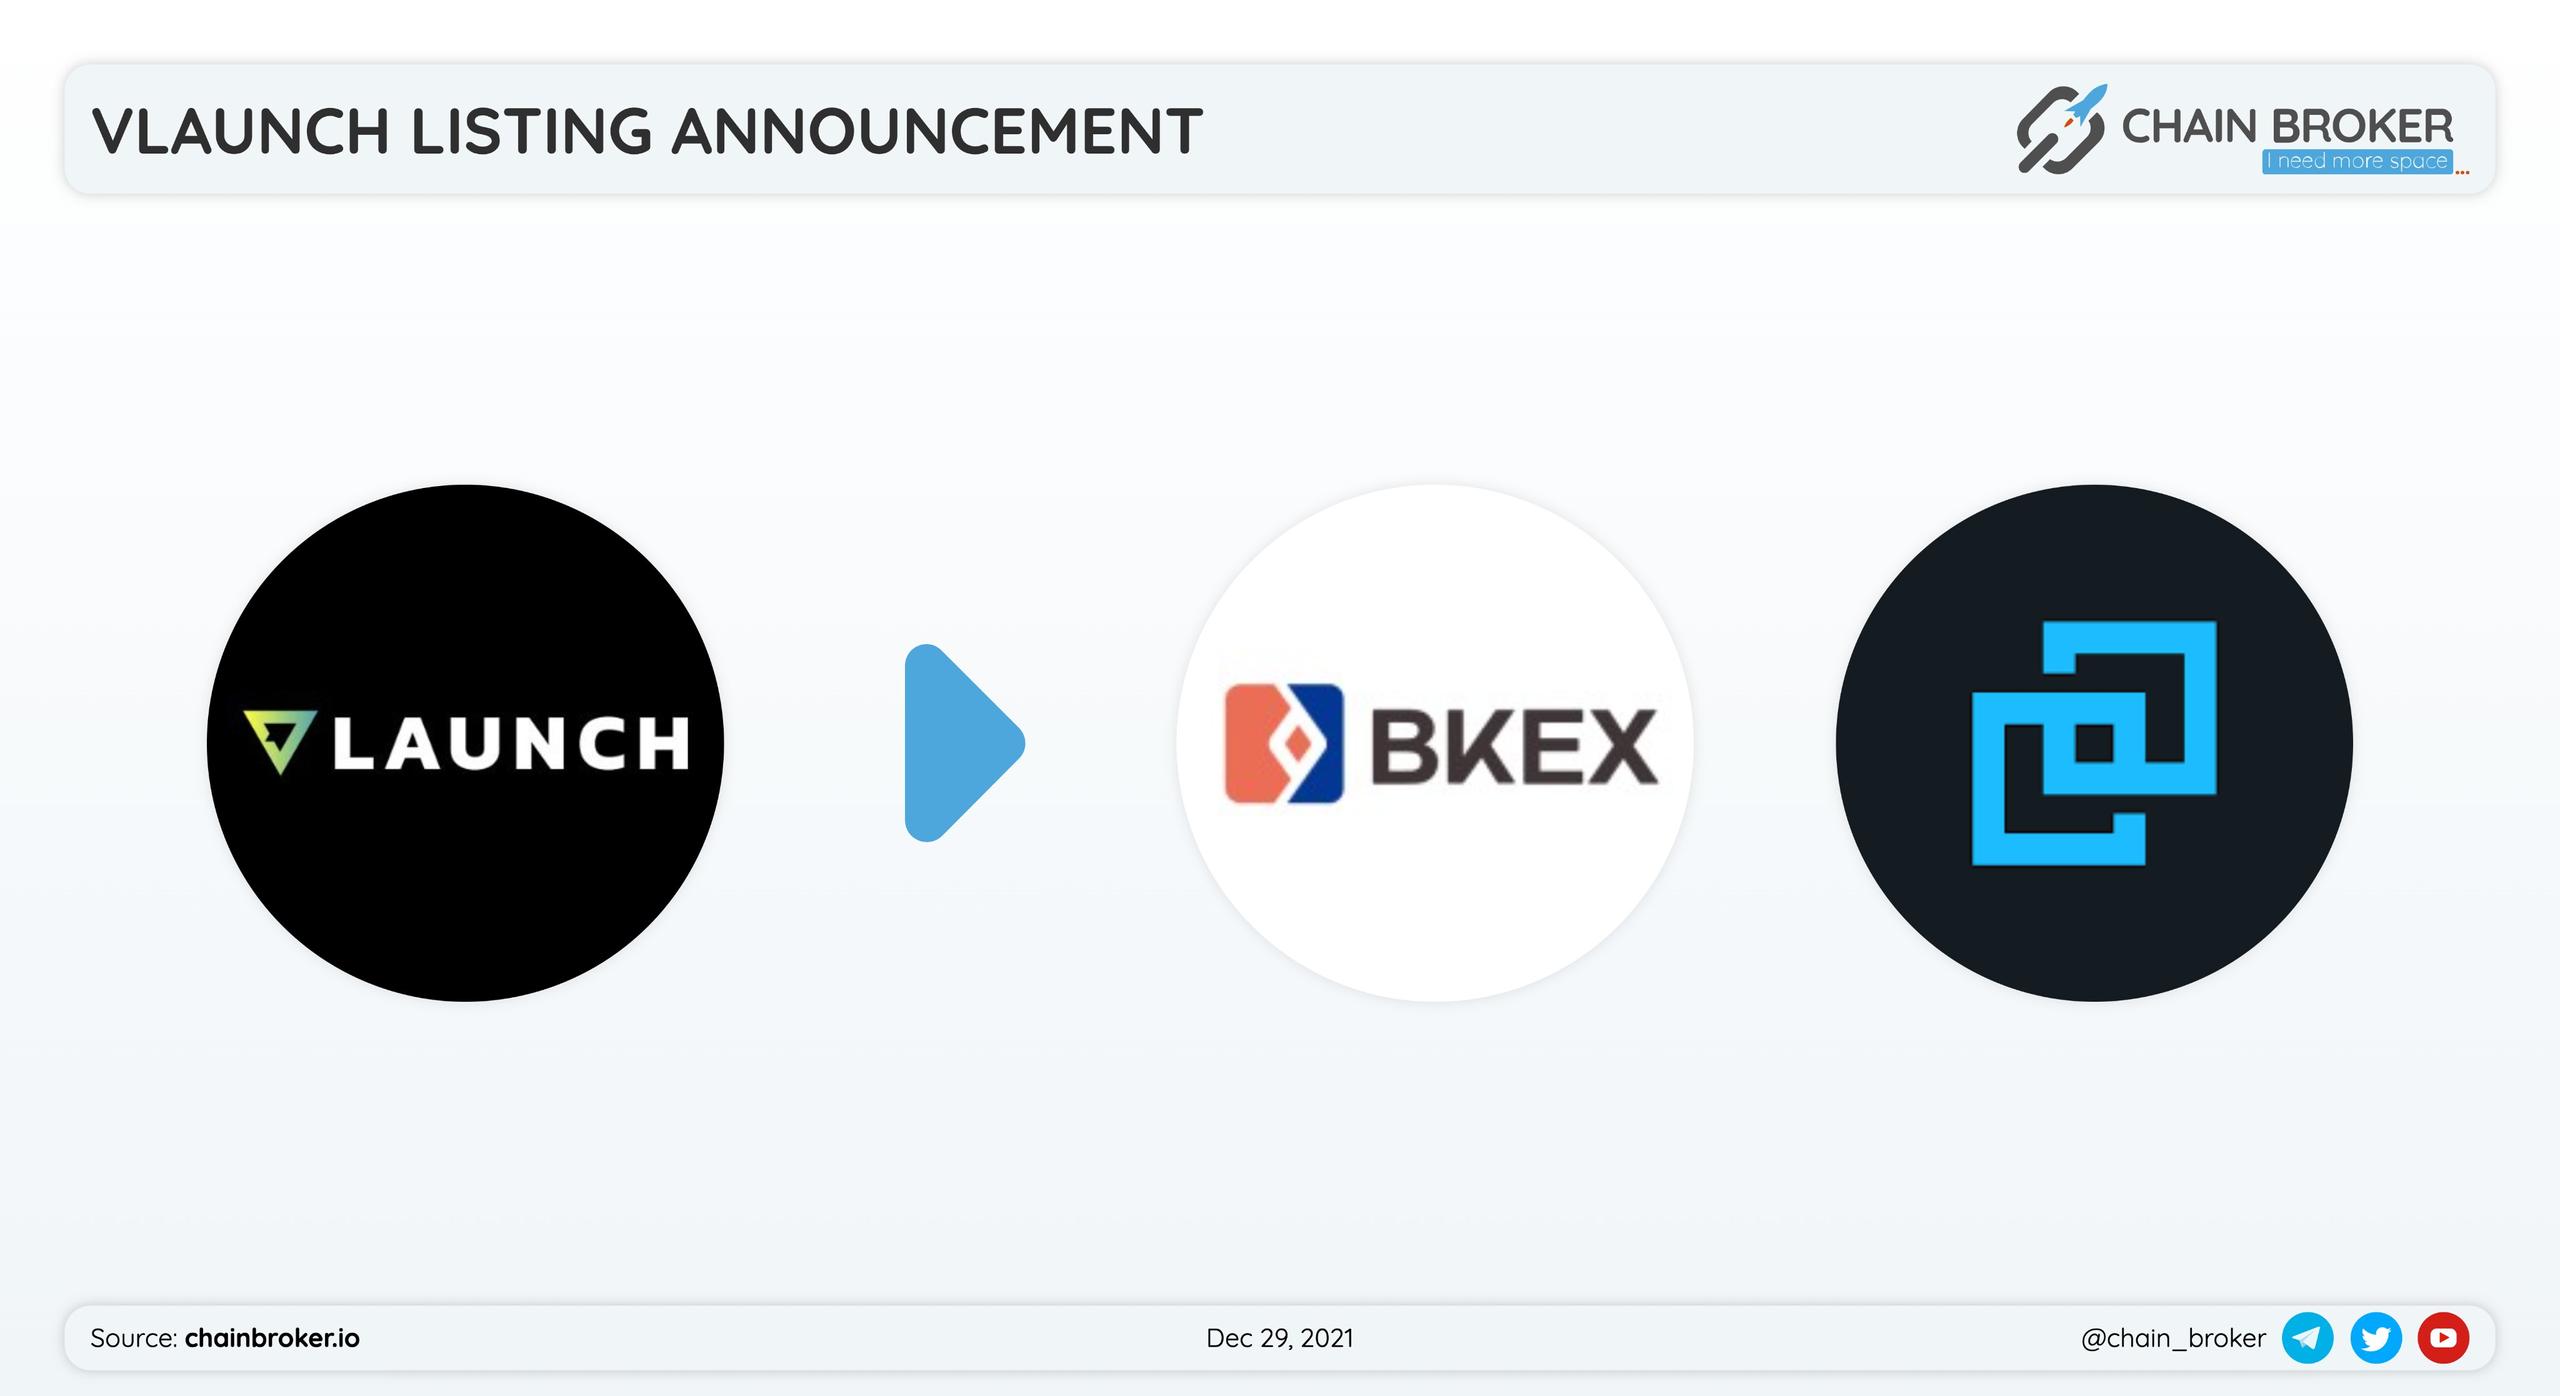 VLaunch was listed on BKEX and Bittrex.